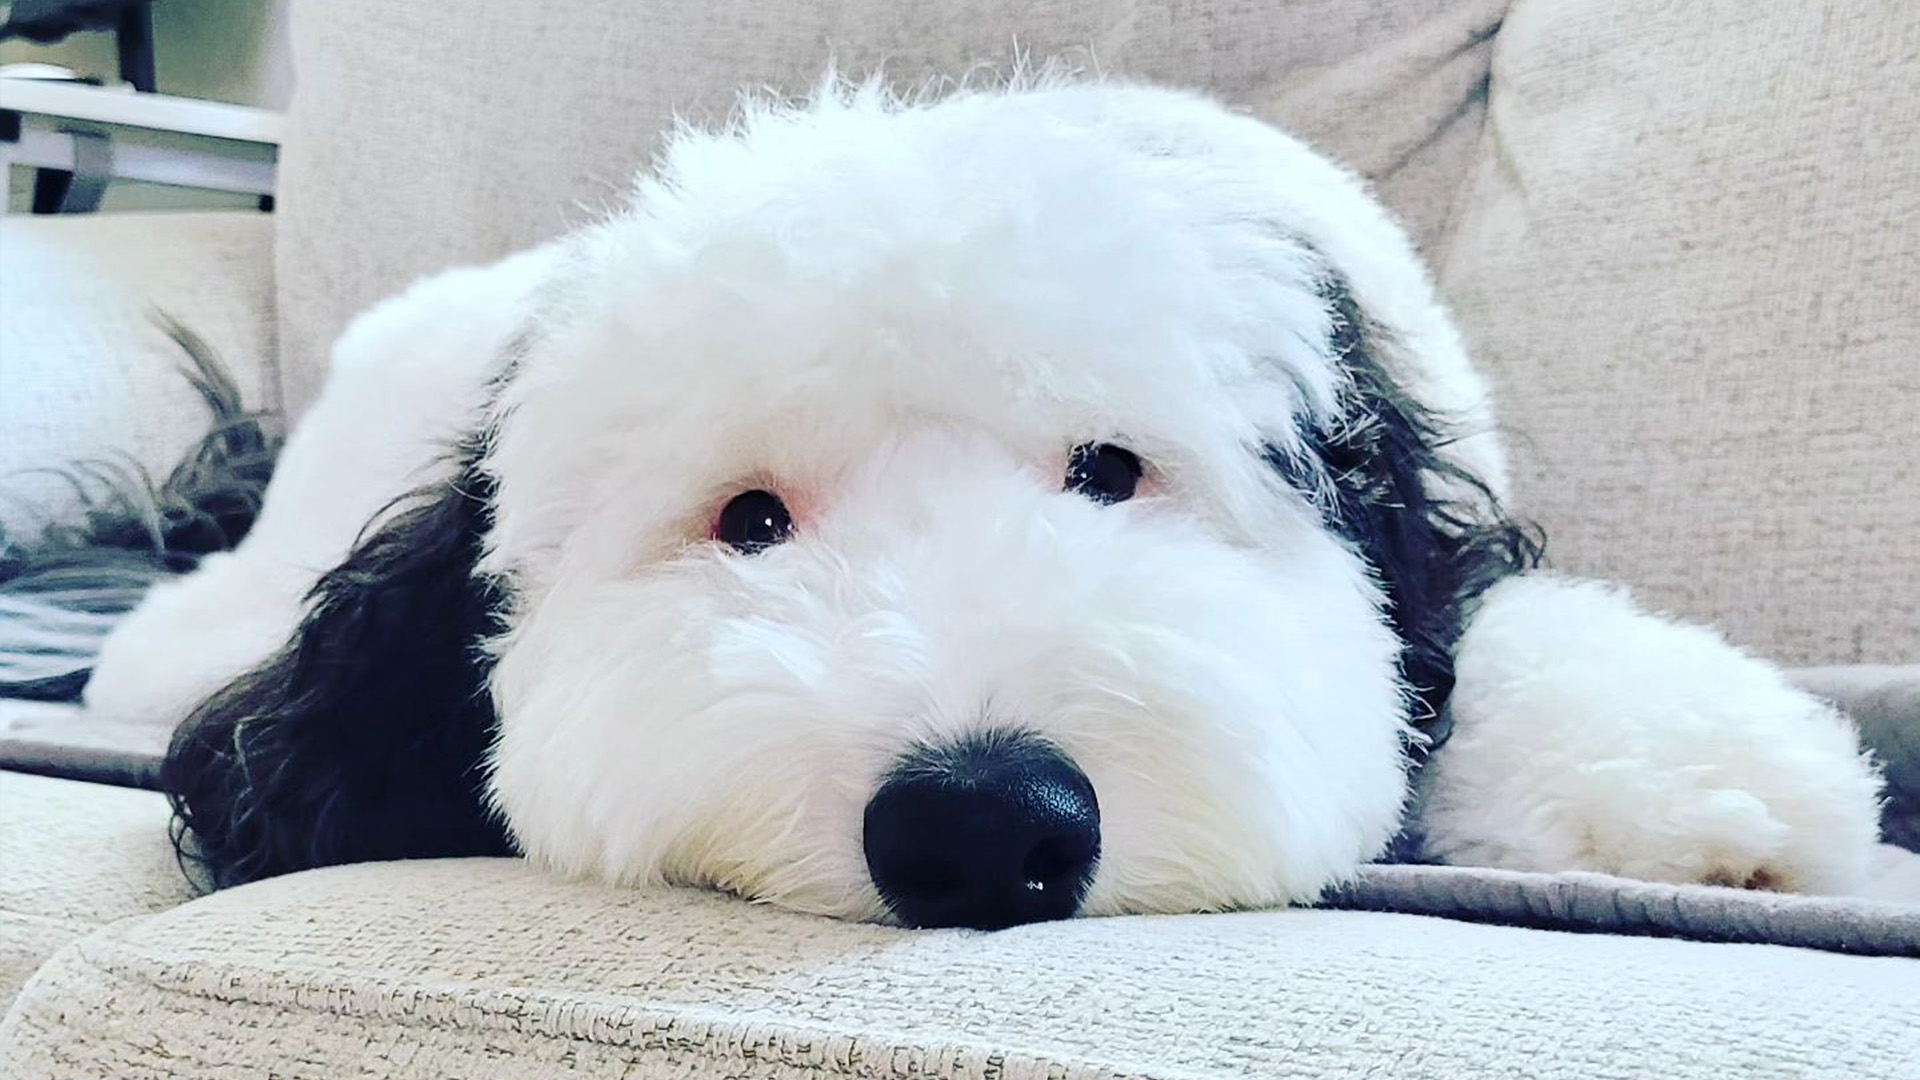 Dog Goes Viral for Looking Like Snoopy